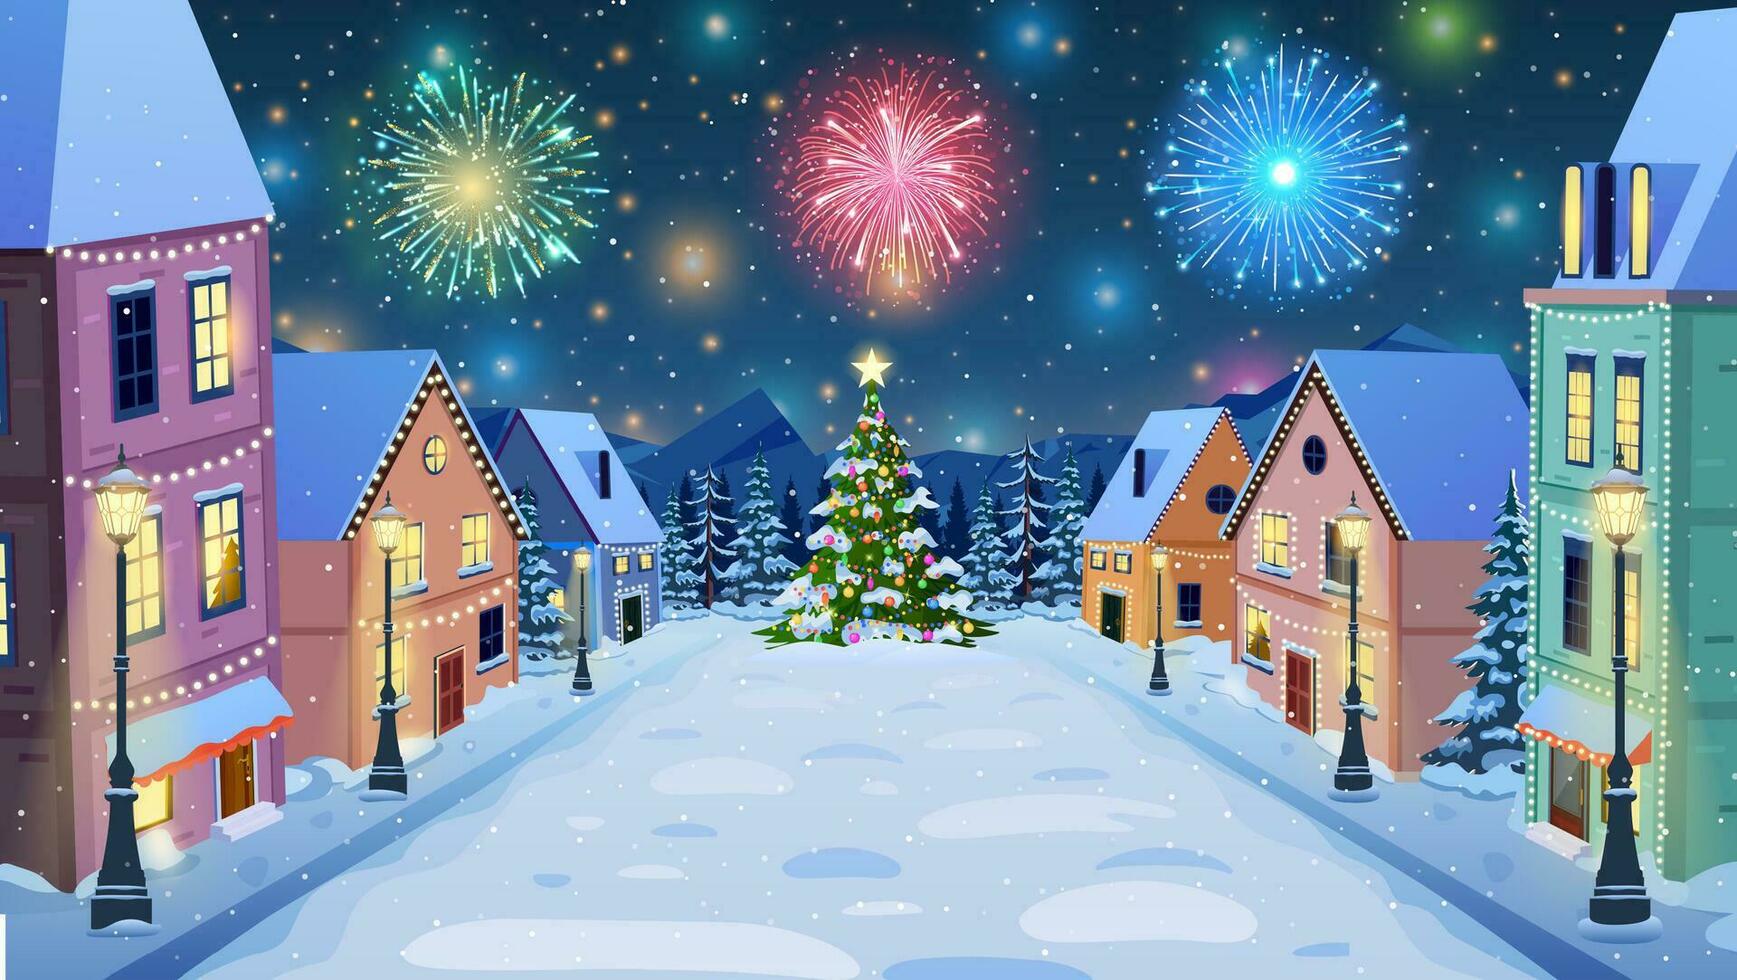 cartoon winter city street with soft street lights in the night in snow fall and christmas tree, fireworks. Merry Christmas and Happy New Year greeting card background poster. Vector illustration